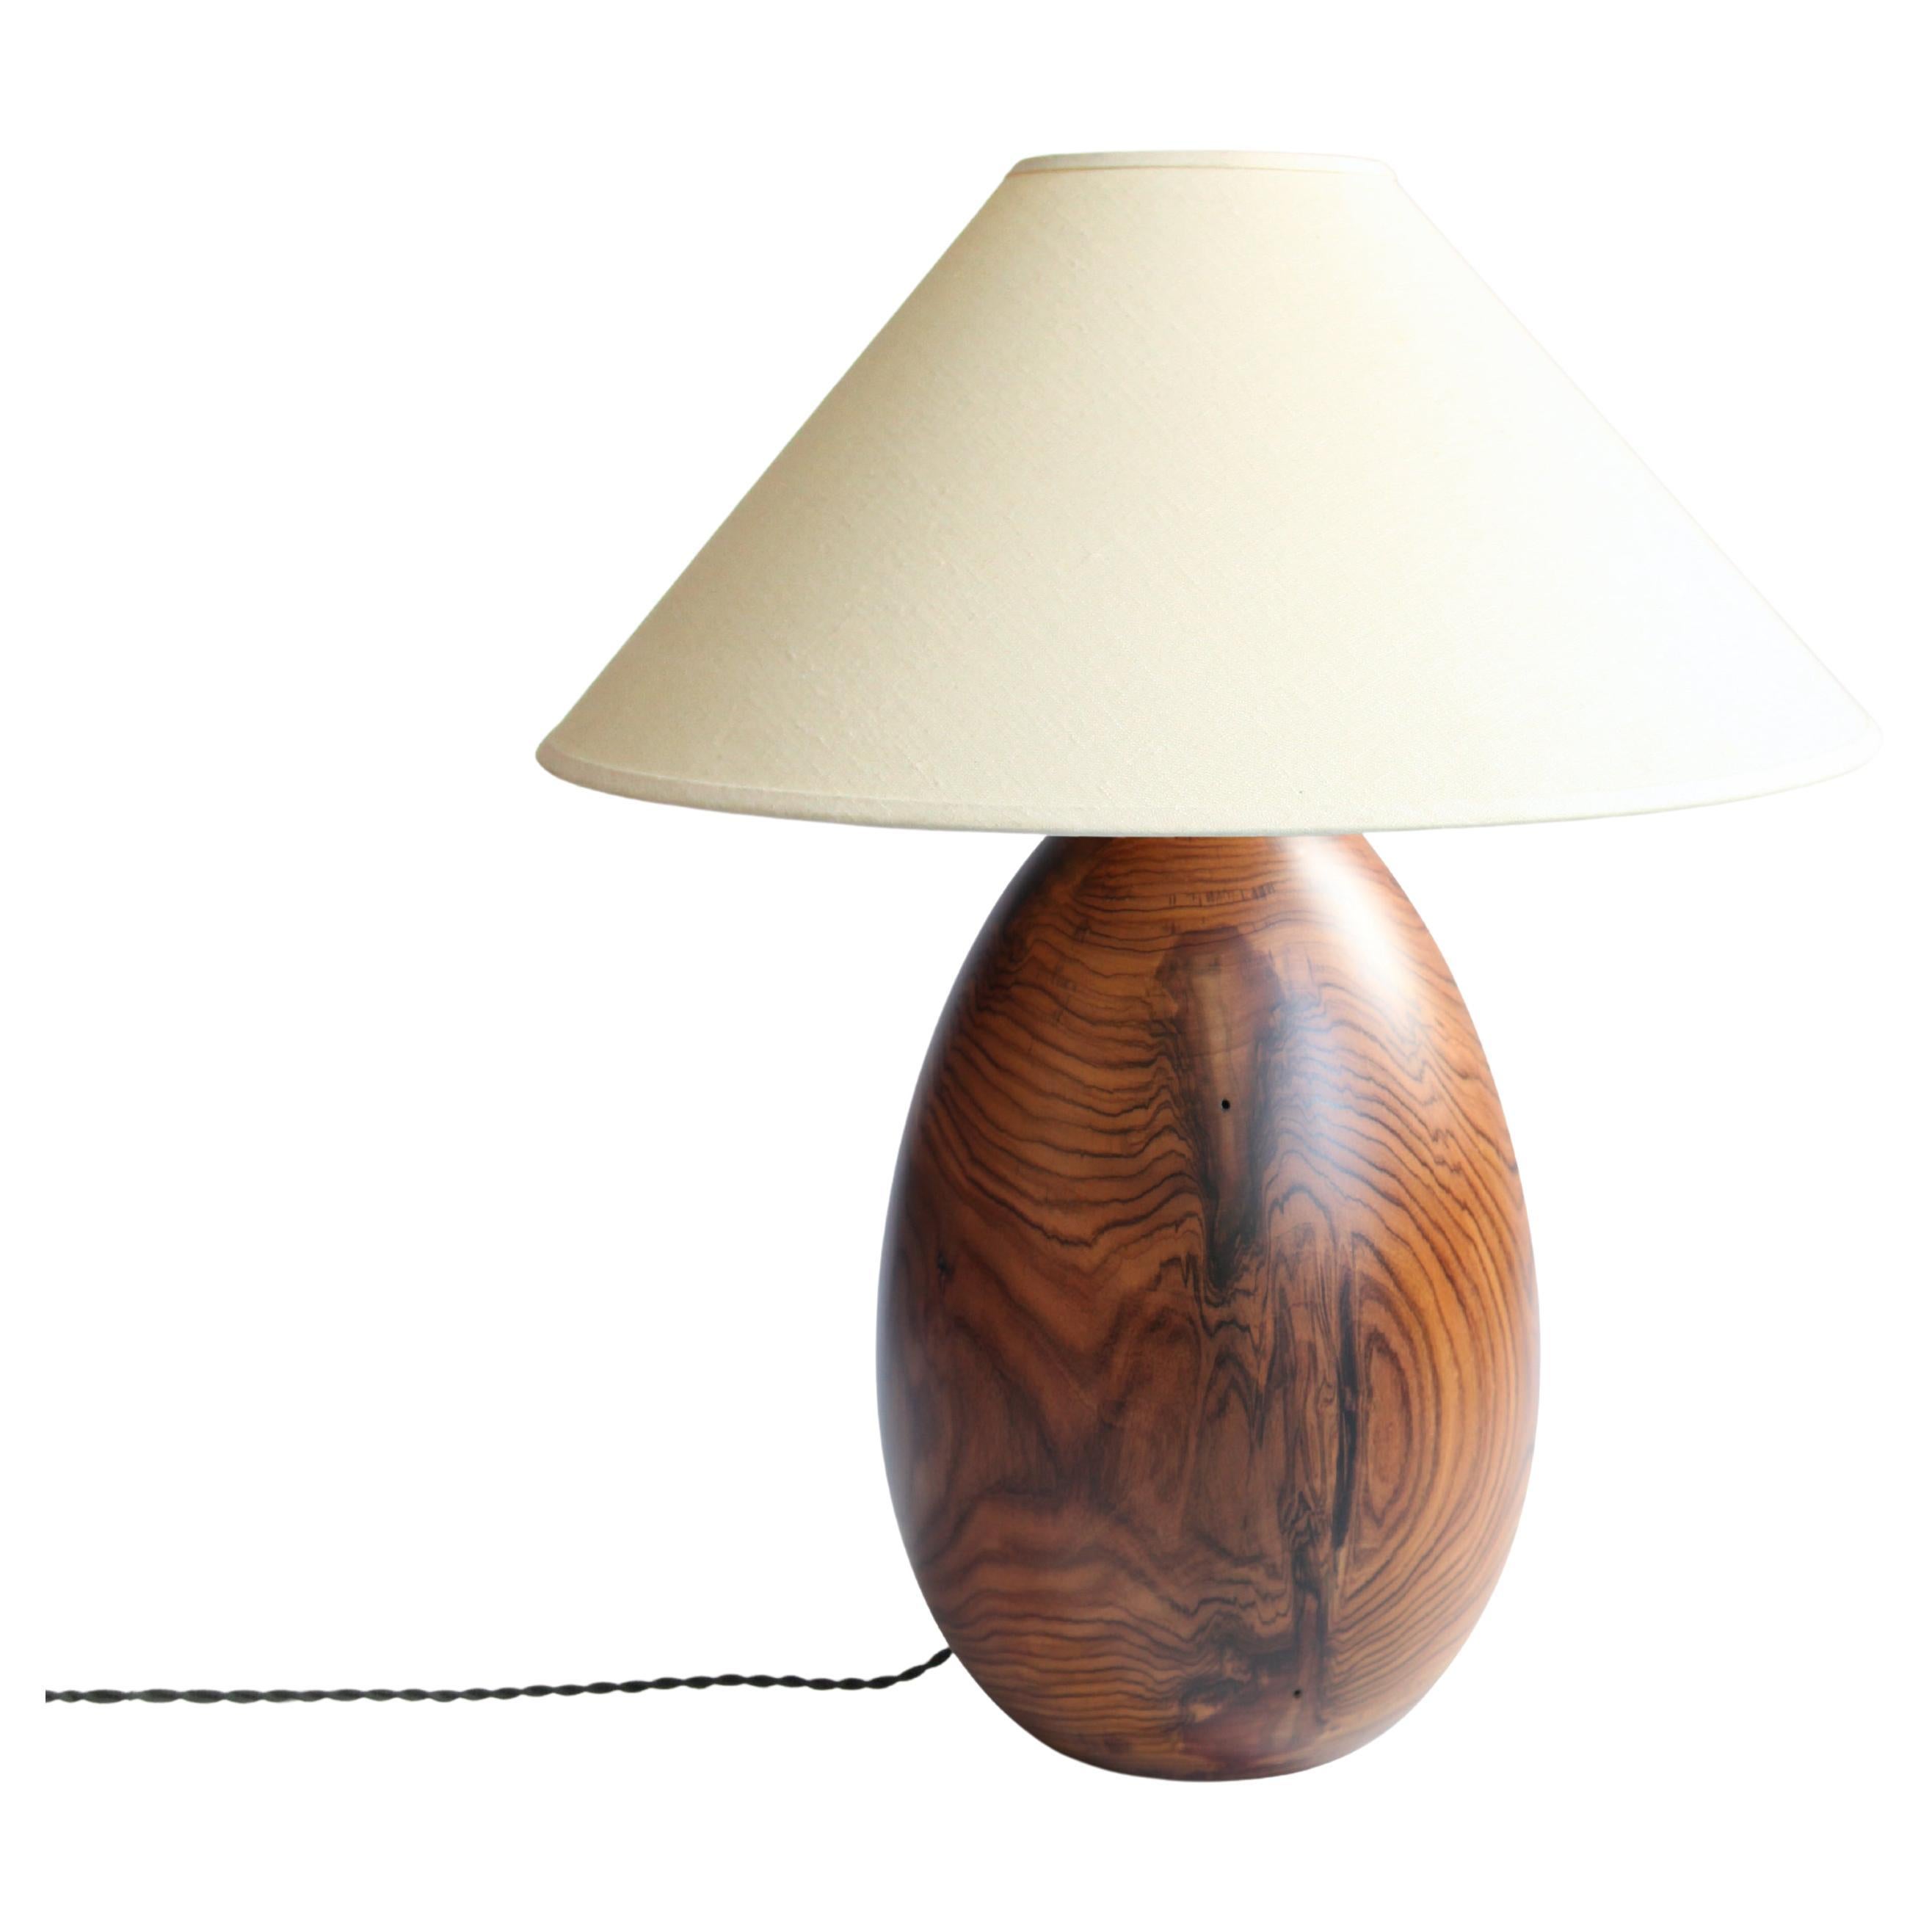 Tropical Hardwood Lamp + White Linen Shade, Medium Large, Árbol Collection, 42 For Sale